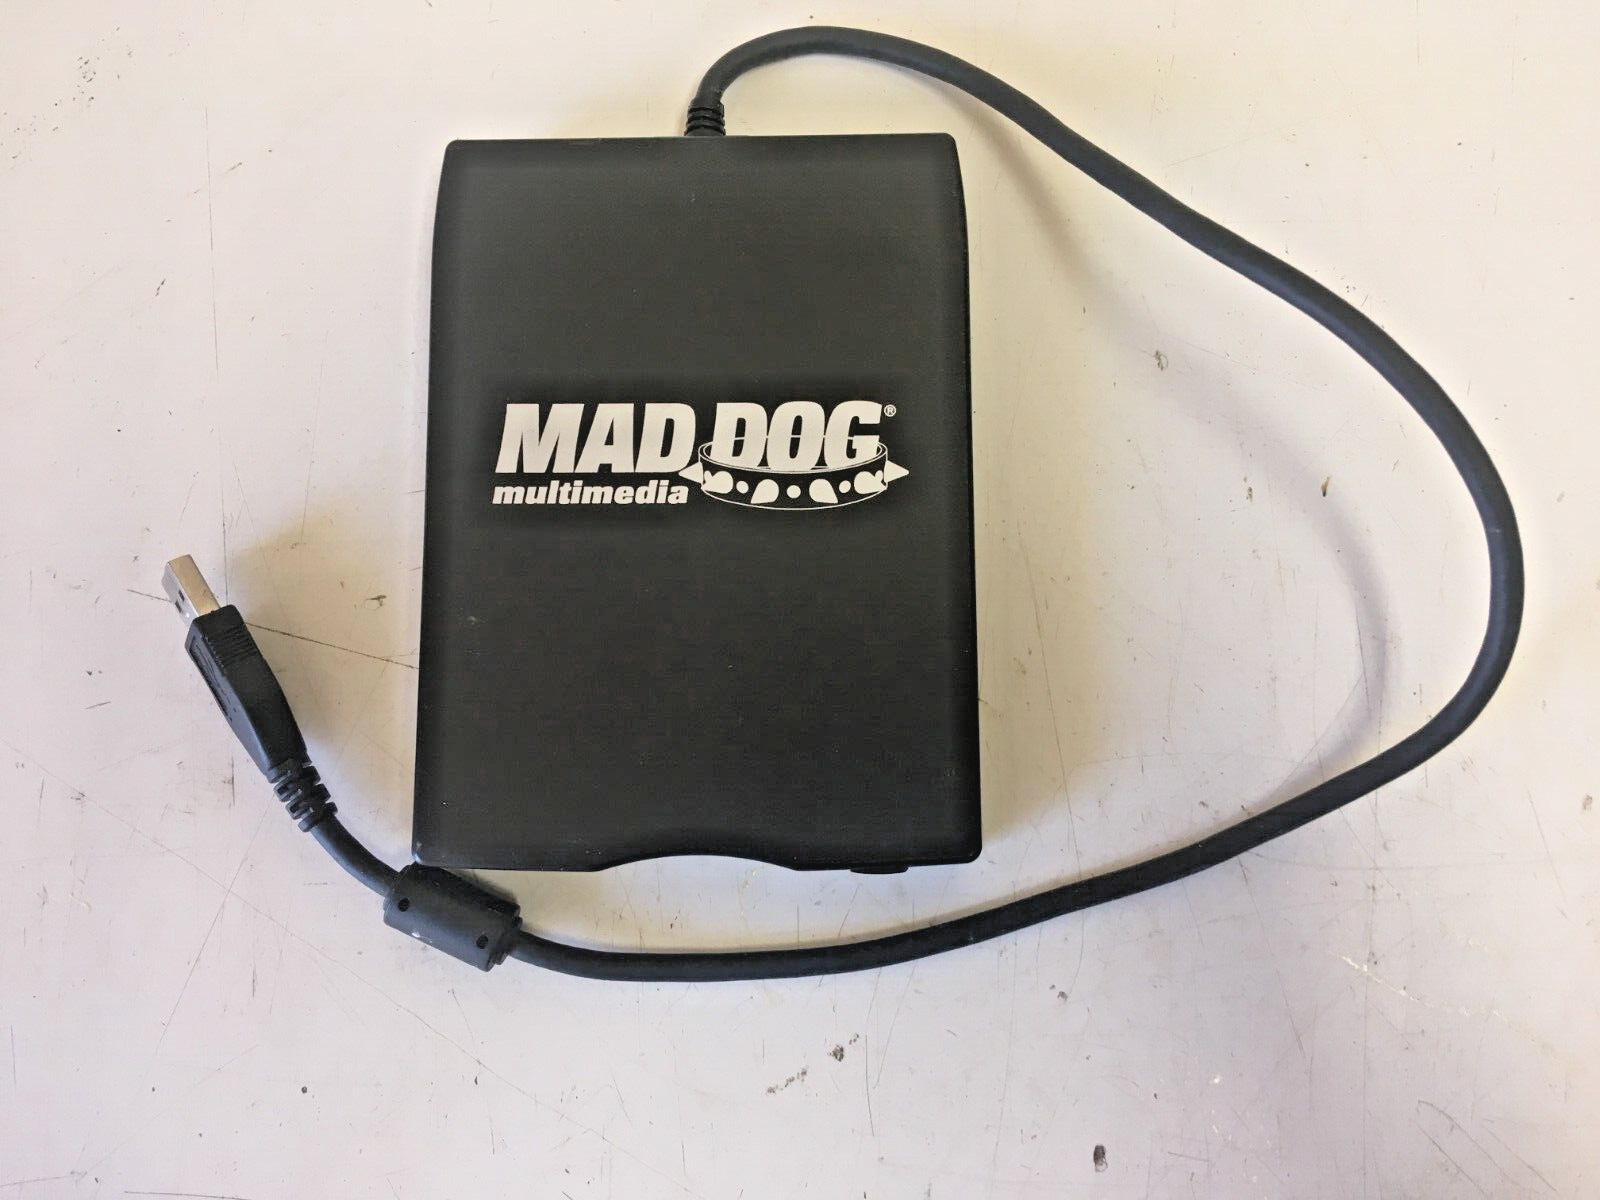 Teac Mad Dog Floppy Drive FD-05PUW